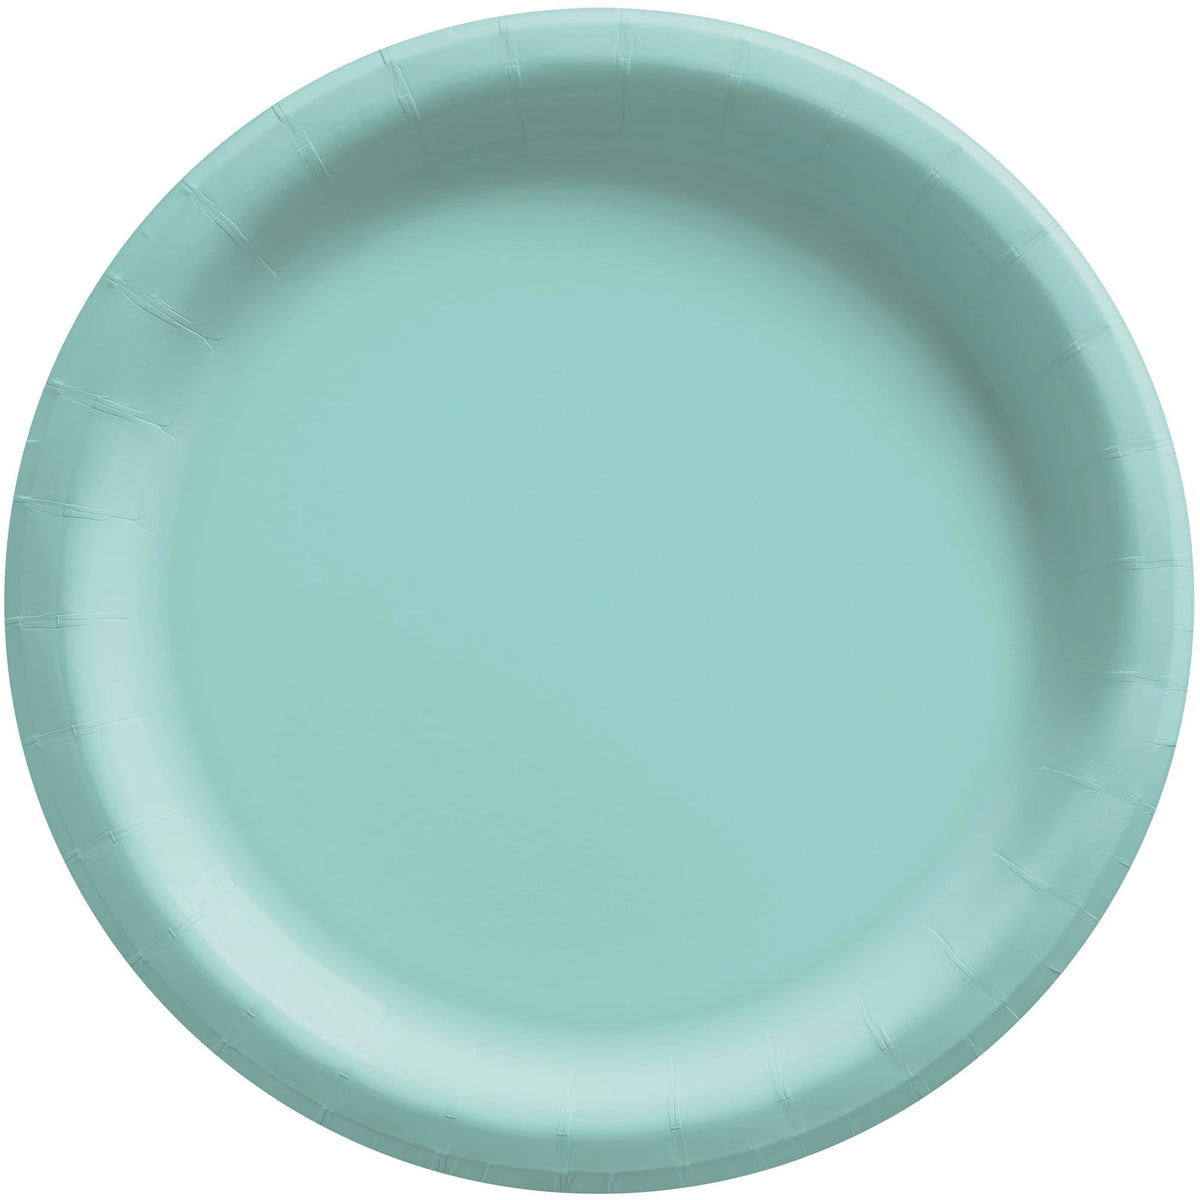 Robins Egg Blue 8 1/2" Round Paper Plates, 20 count